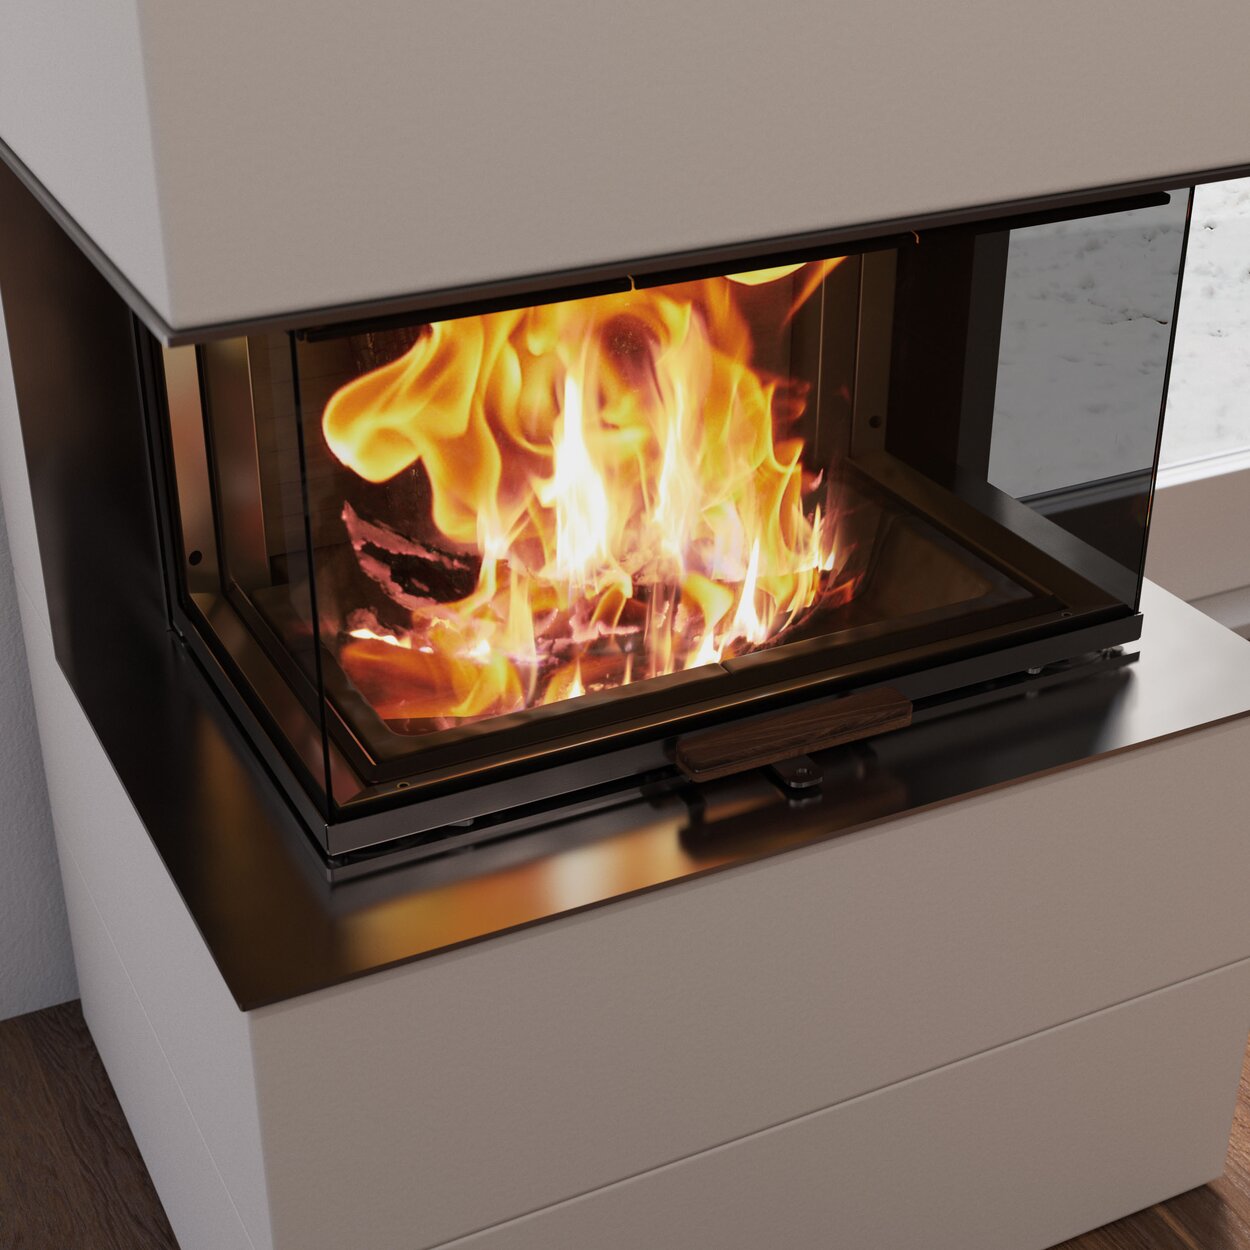 Wood fireplace VISIO 3 ELEMENT with black window & support frame and high flame in the firebox